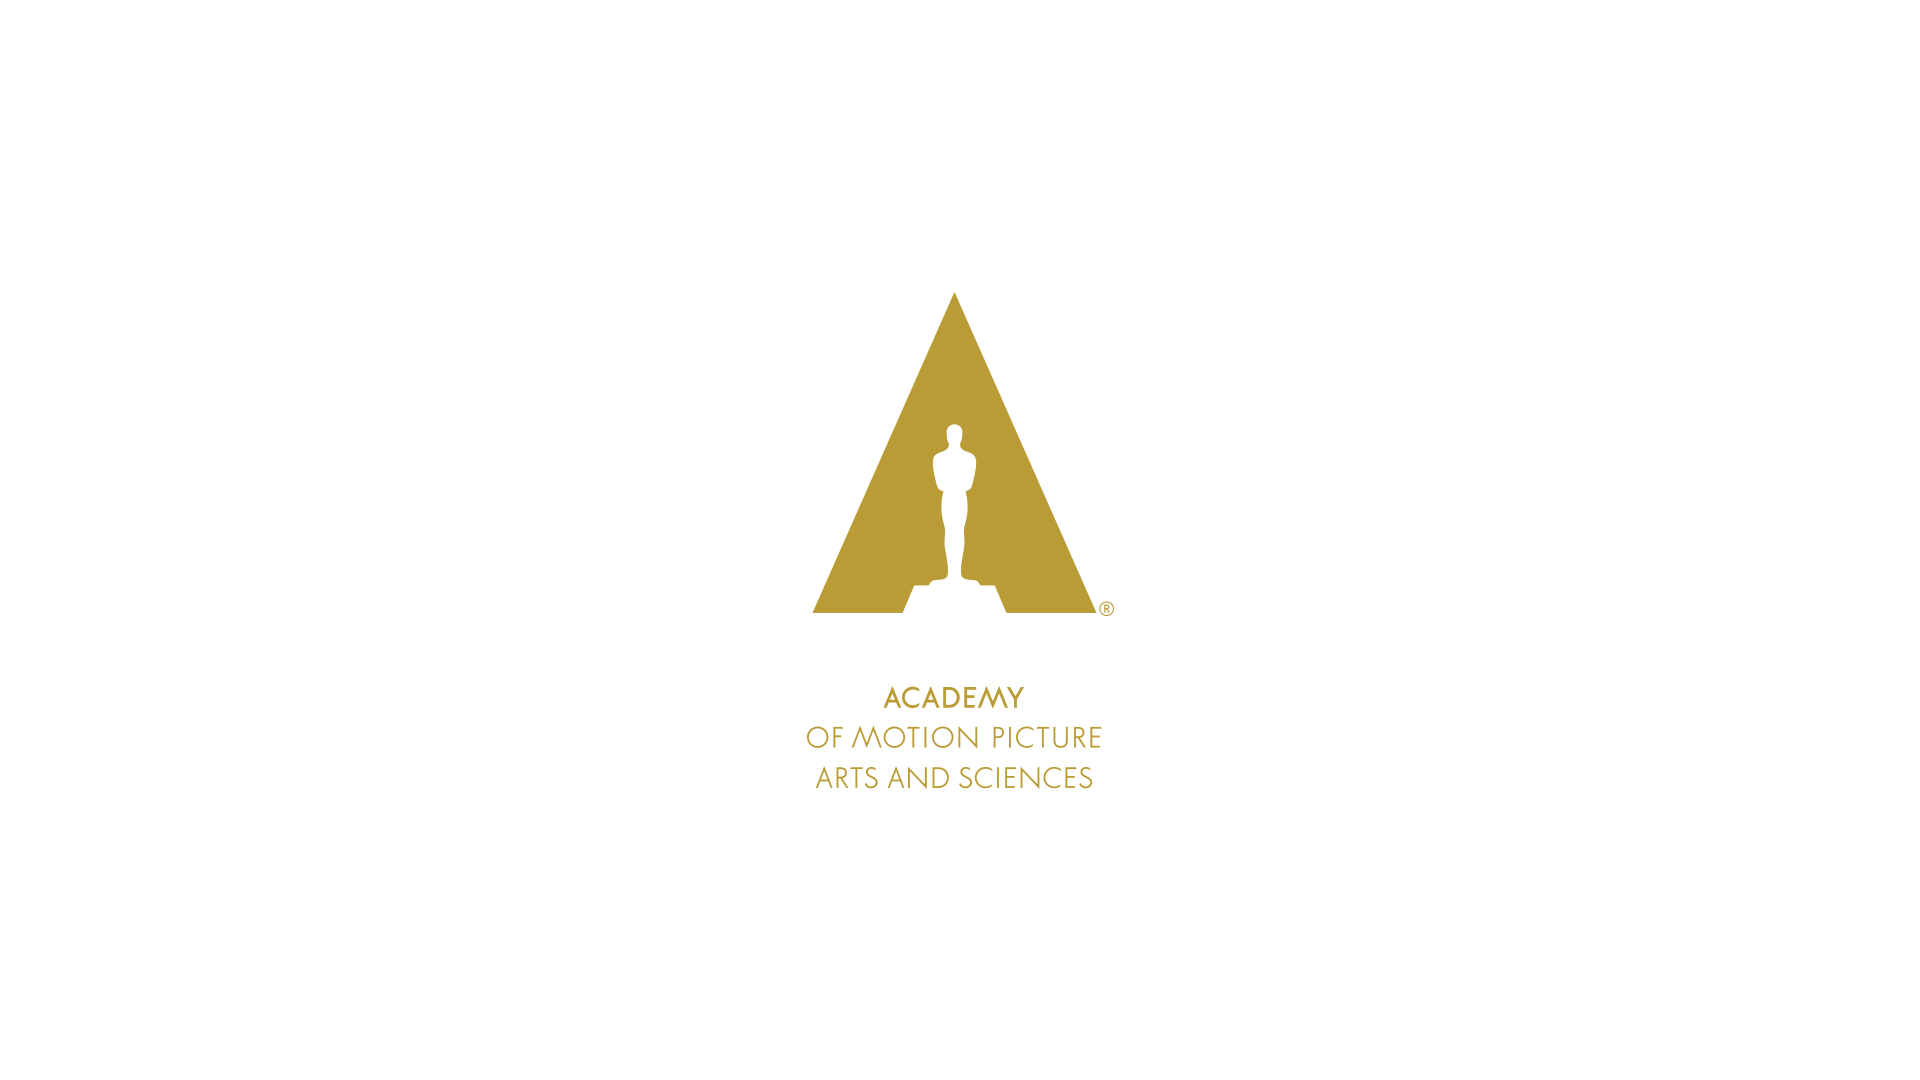 ACADEMY TO CREATE TWO INDIVIDUAL BRANCHES FROM  SHORT FILMS AND FEATURE ANIMATION BRANCH: ANIMATION BRANCH AND SHORT FILMS BRANCH